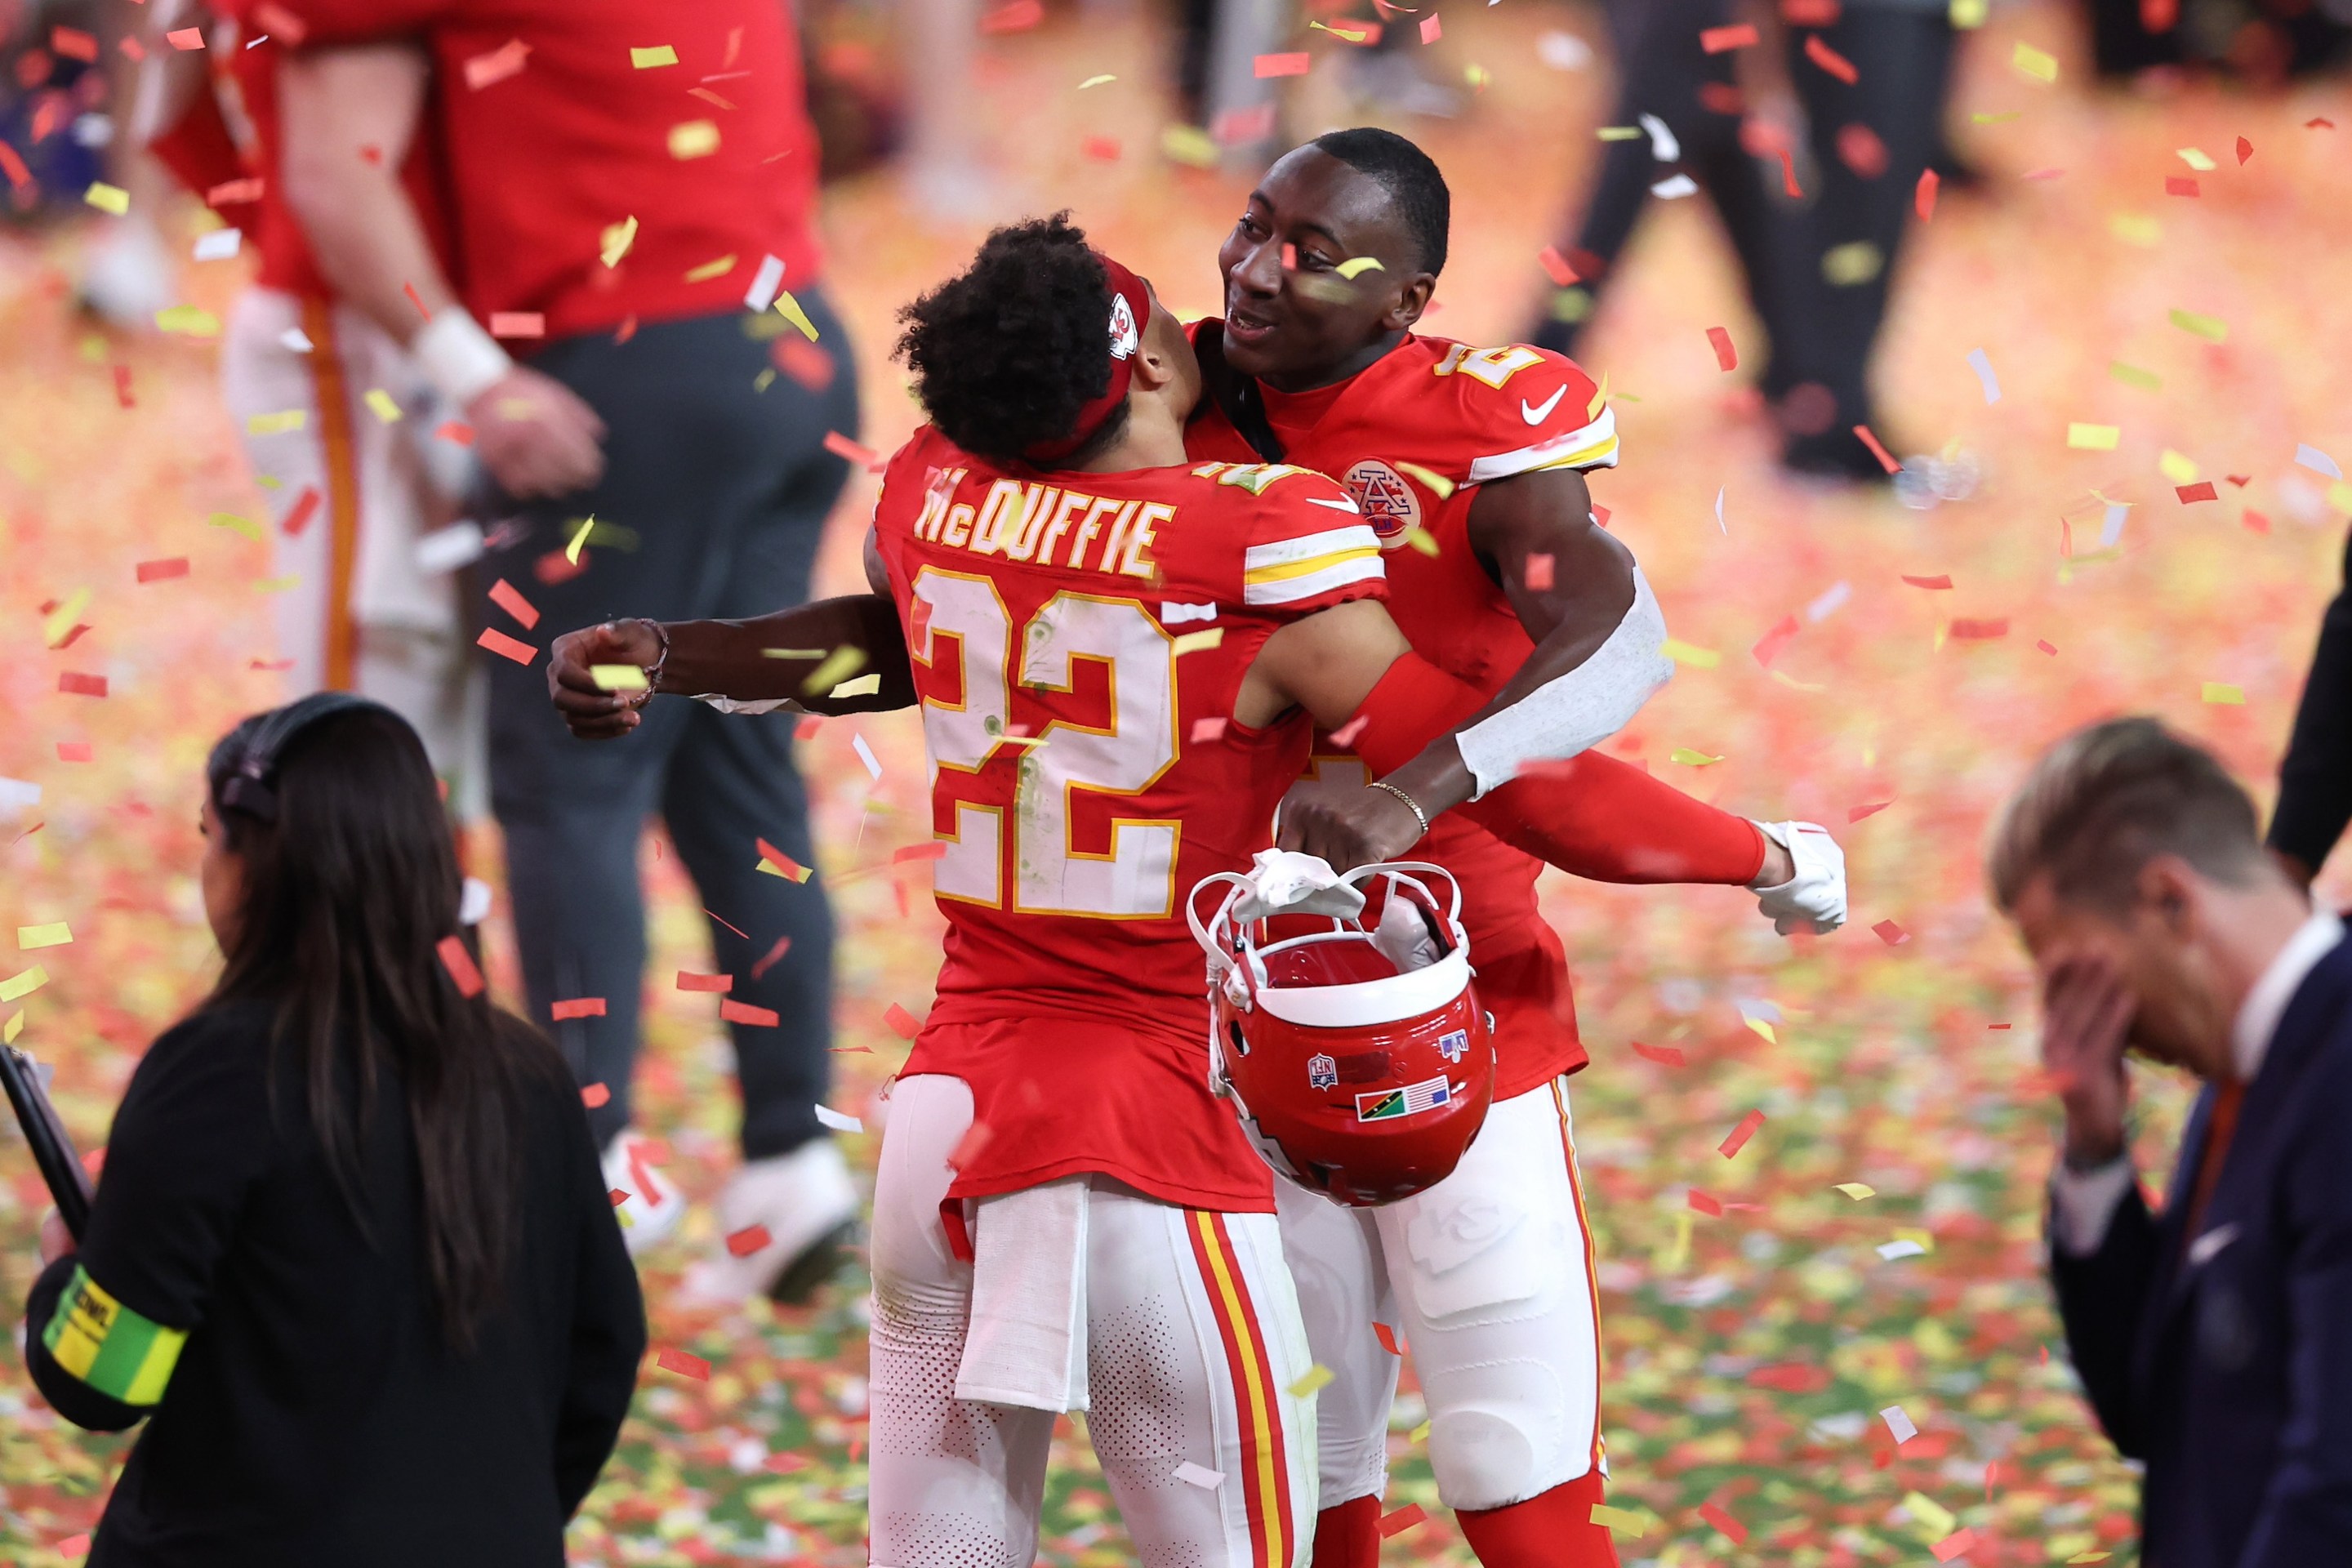 LAS VEGAS, NEVADA - FEBRUARY 11: Trent McDuffie #22 of the Kansas City Chiefs celebrates with teammates after defeating the San Francisco 49ers 25-22 in overtime during Super Bowl LVIII at Allegiant Stadium on February 11, 2024 in Las Vegas, Nevada. (Photo by Steph Chambers/Getty Images)